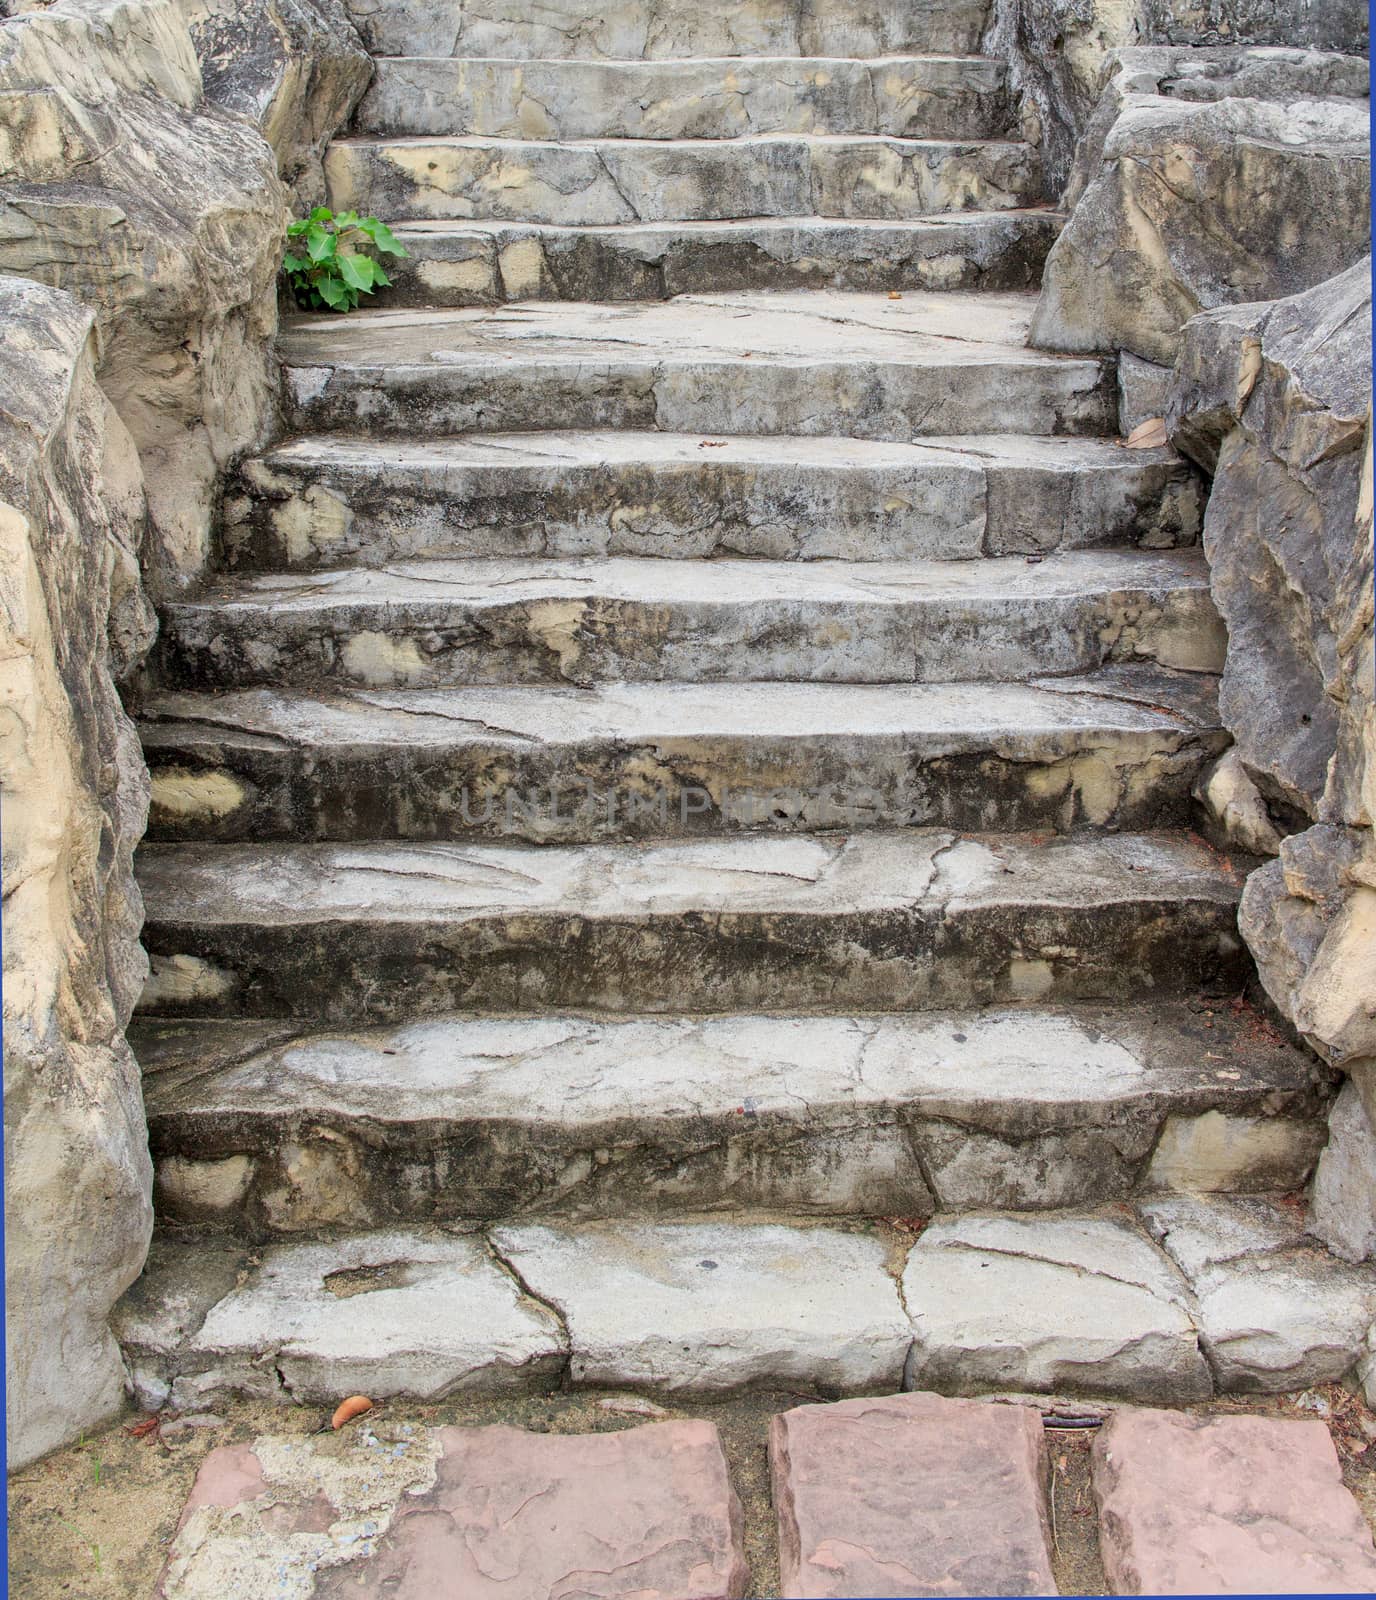 Up stairs are made of natural stone.